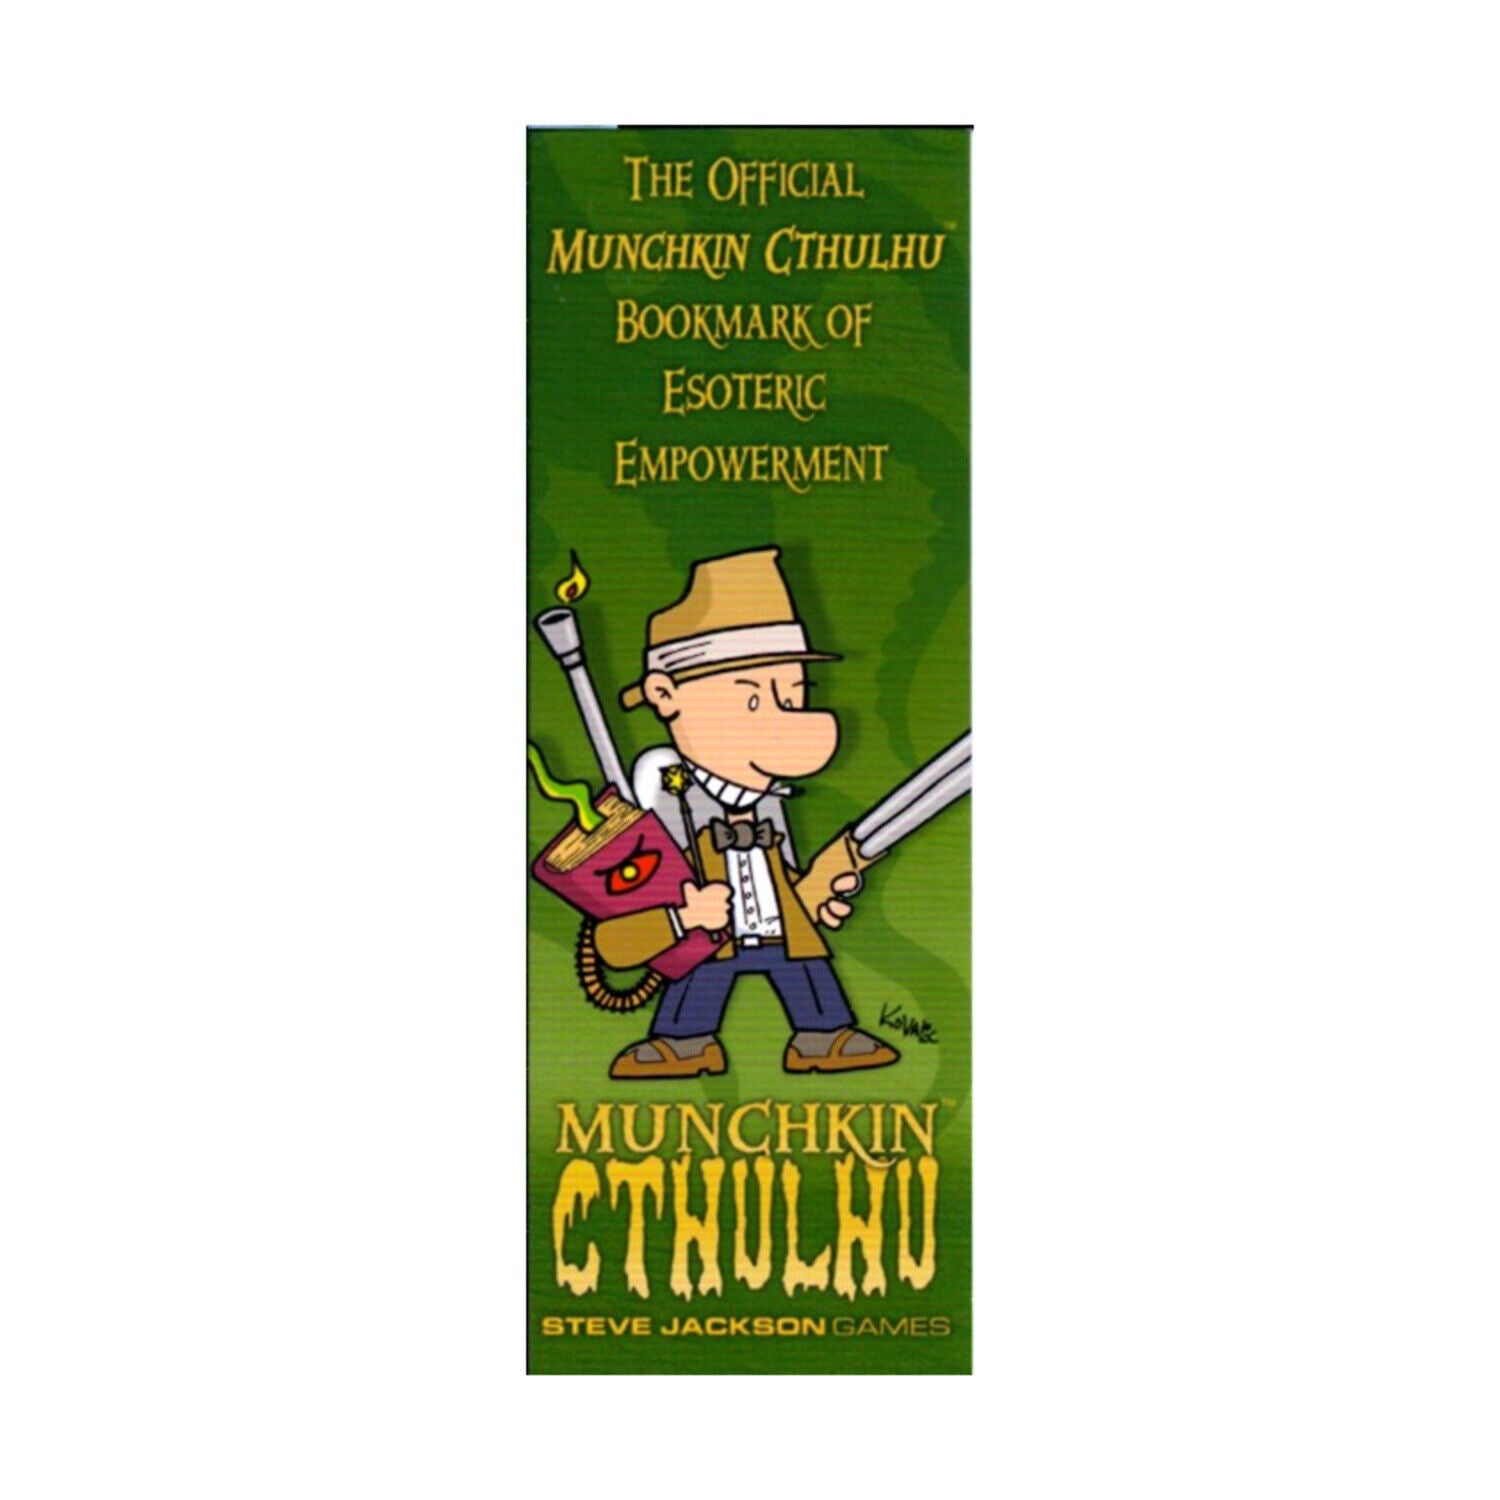 The Official Munchkin Cthulhu Bookmark of Esoteric Empowerment